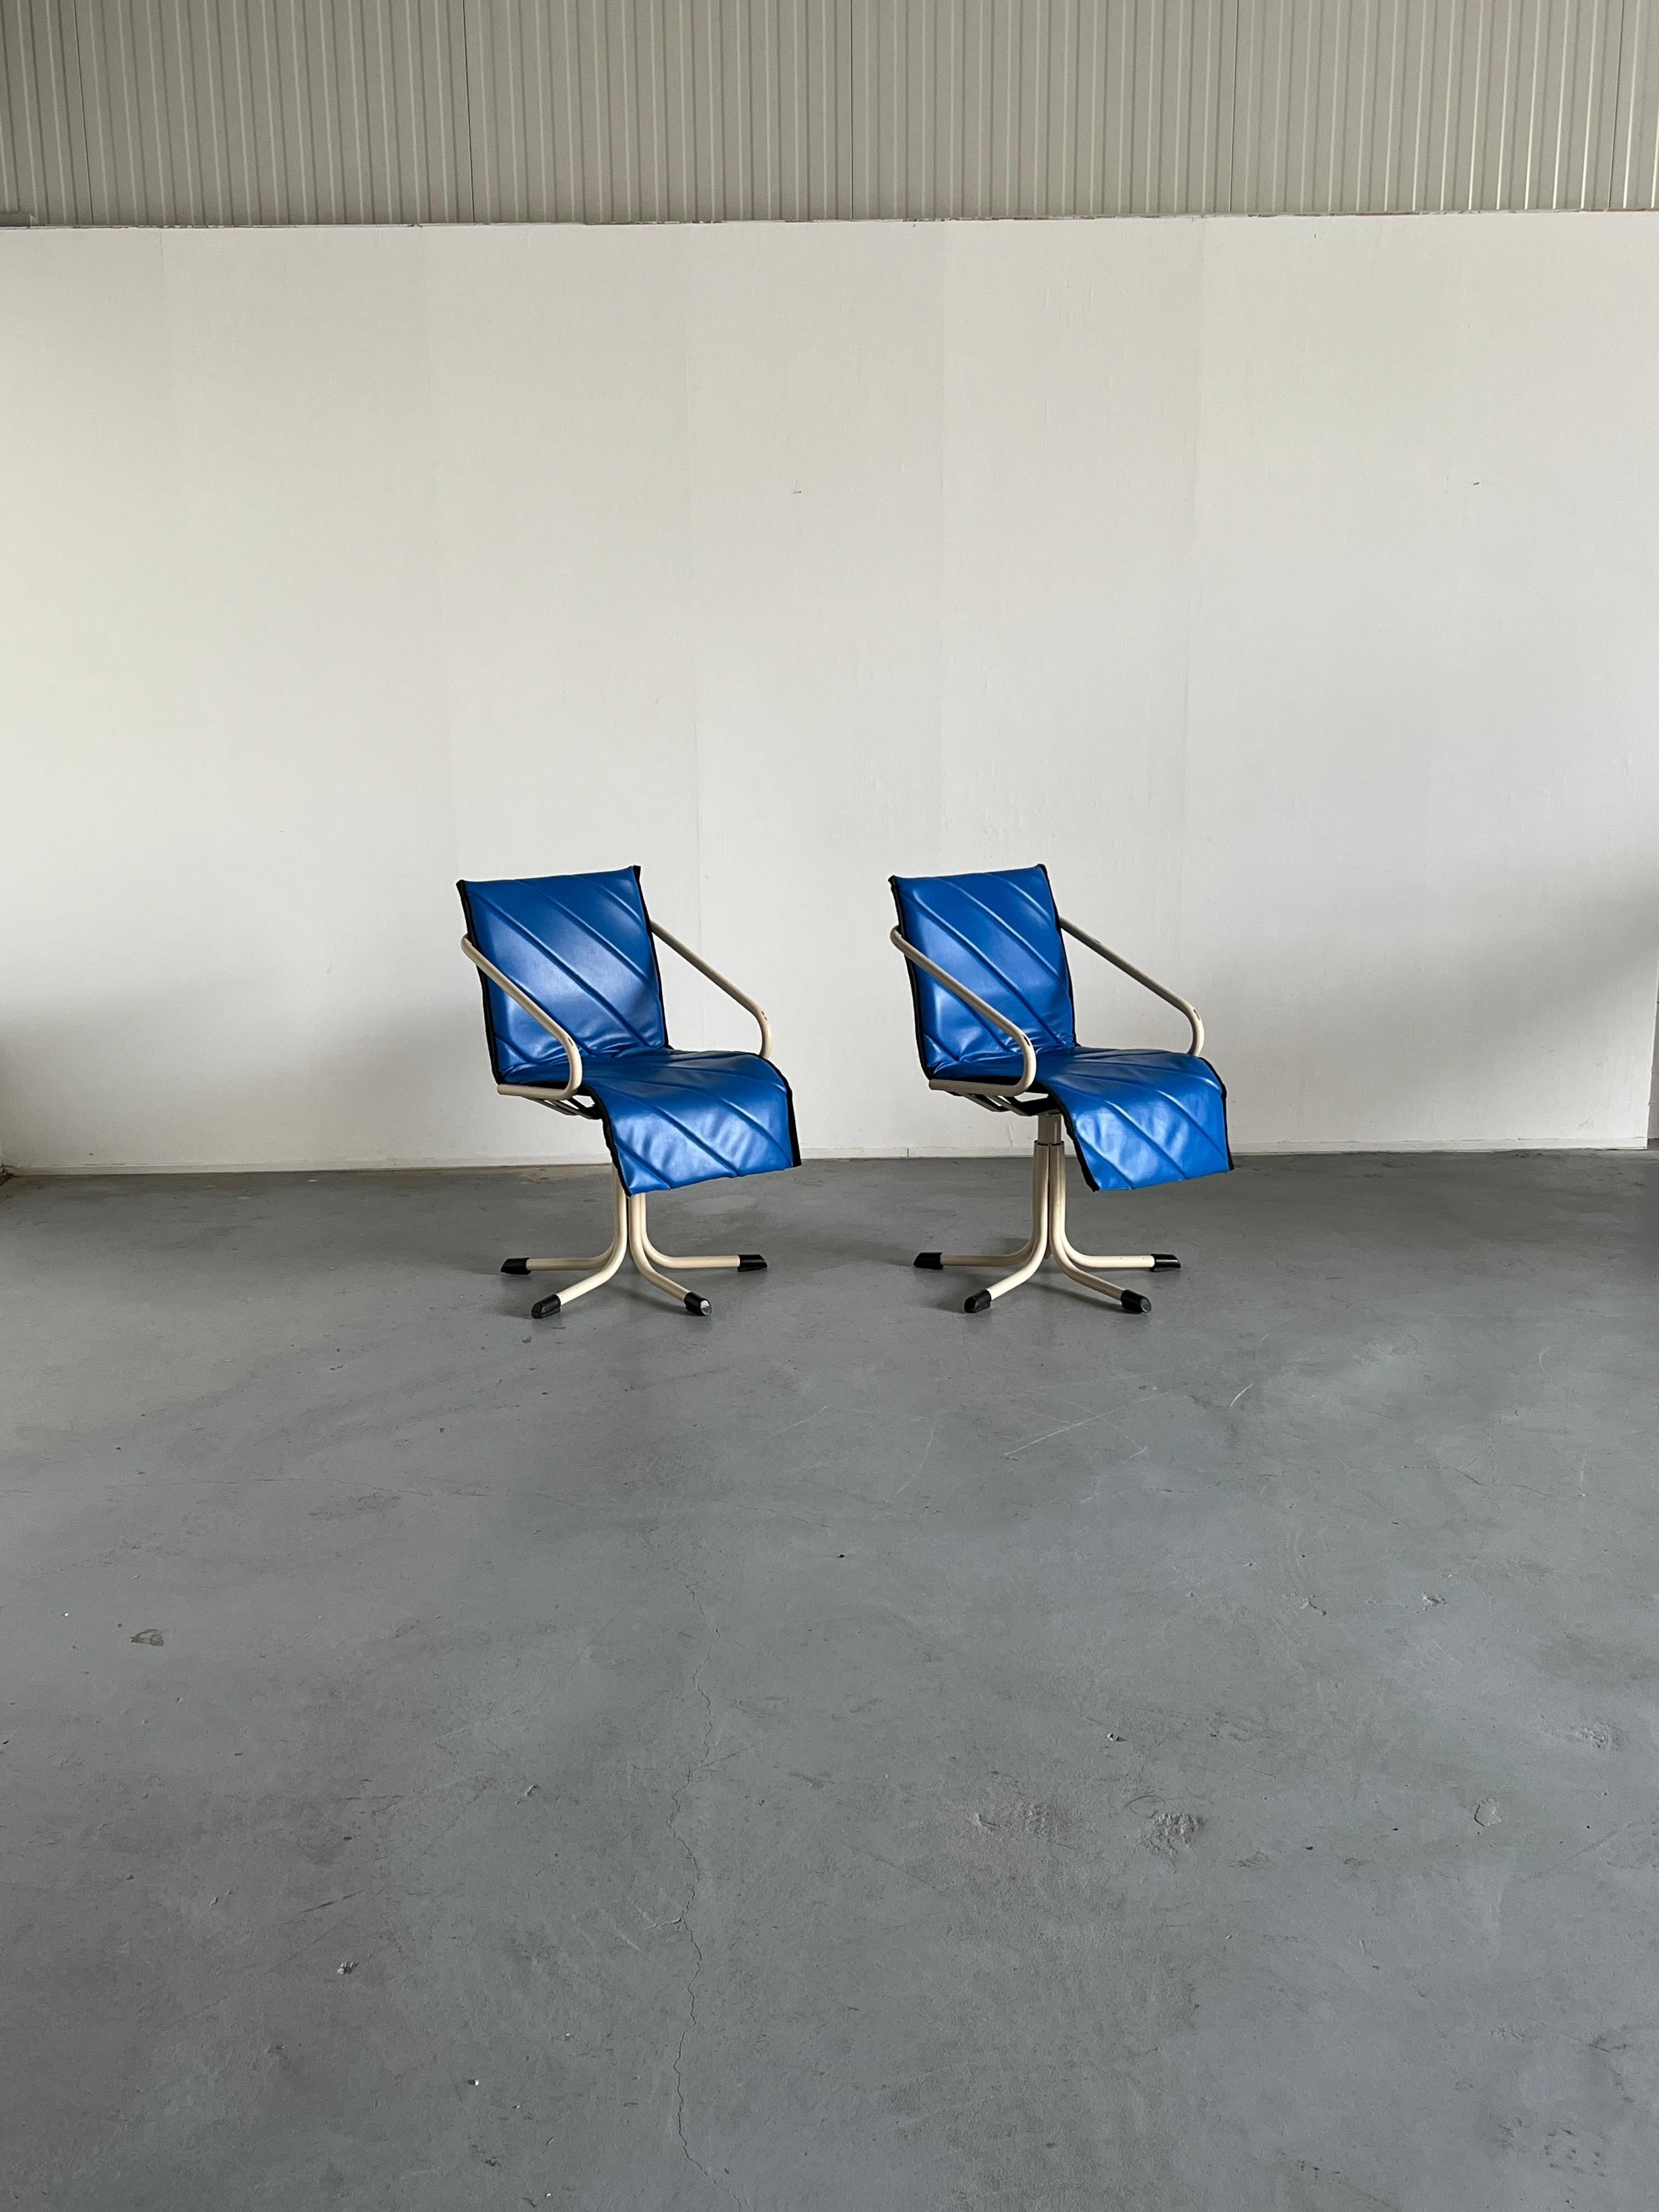 Two unique German space age or atomic age swivel armchairs, in blue faux leather seat and white metal base. Produced by Müster.

Well preserved, with some expected signs of age, mostly surface scratches on the metal parts - mostly visible on the